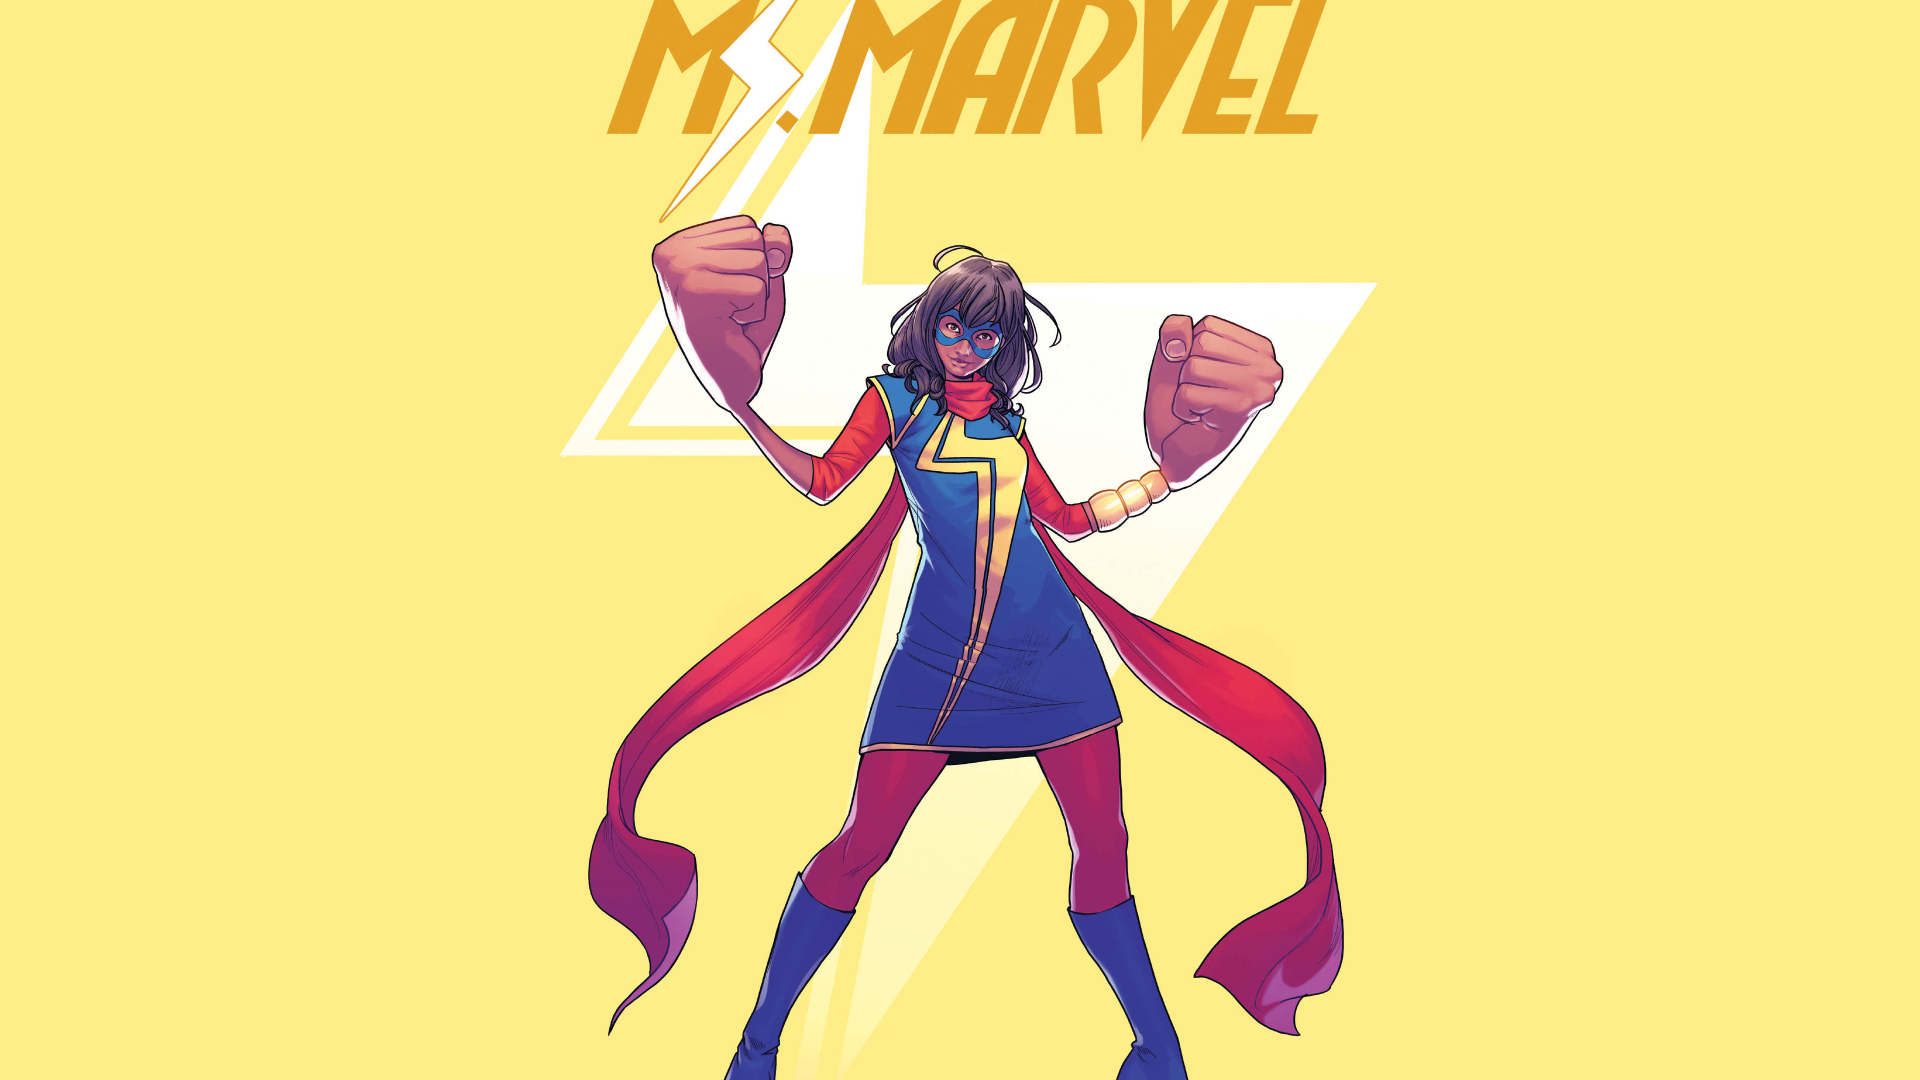 1920x1080 Mcu Kamala Khan As Ms Marvel 1080p Laptop Full Hd Wallpaper Hd Superheroes 4k Wallpapers Images Photos And Background